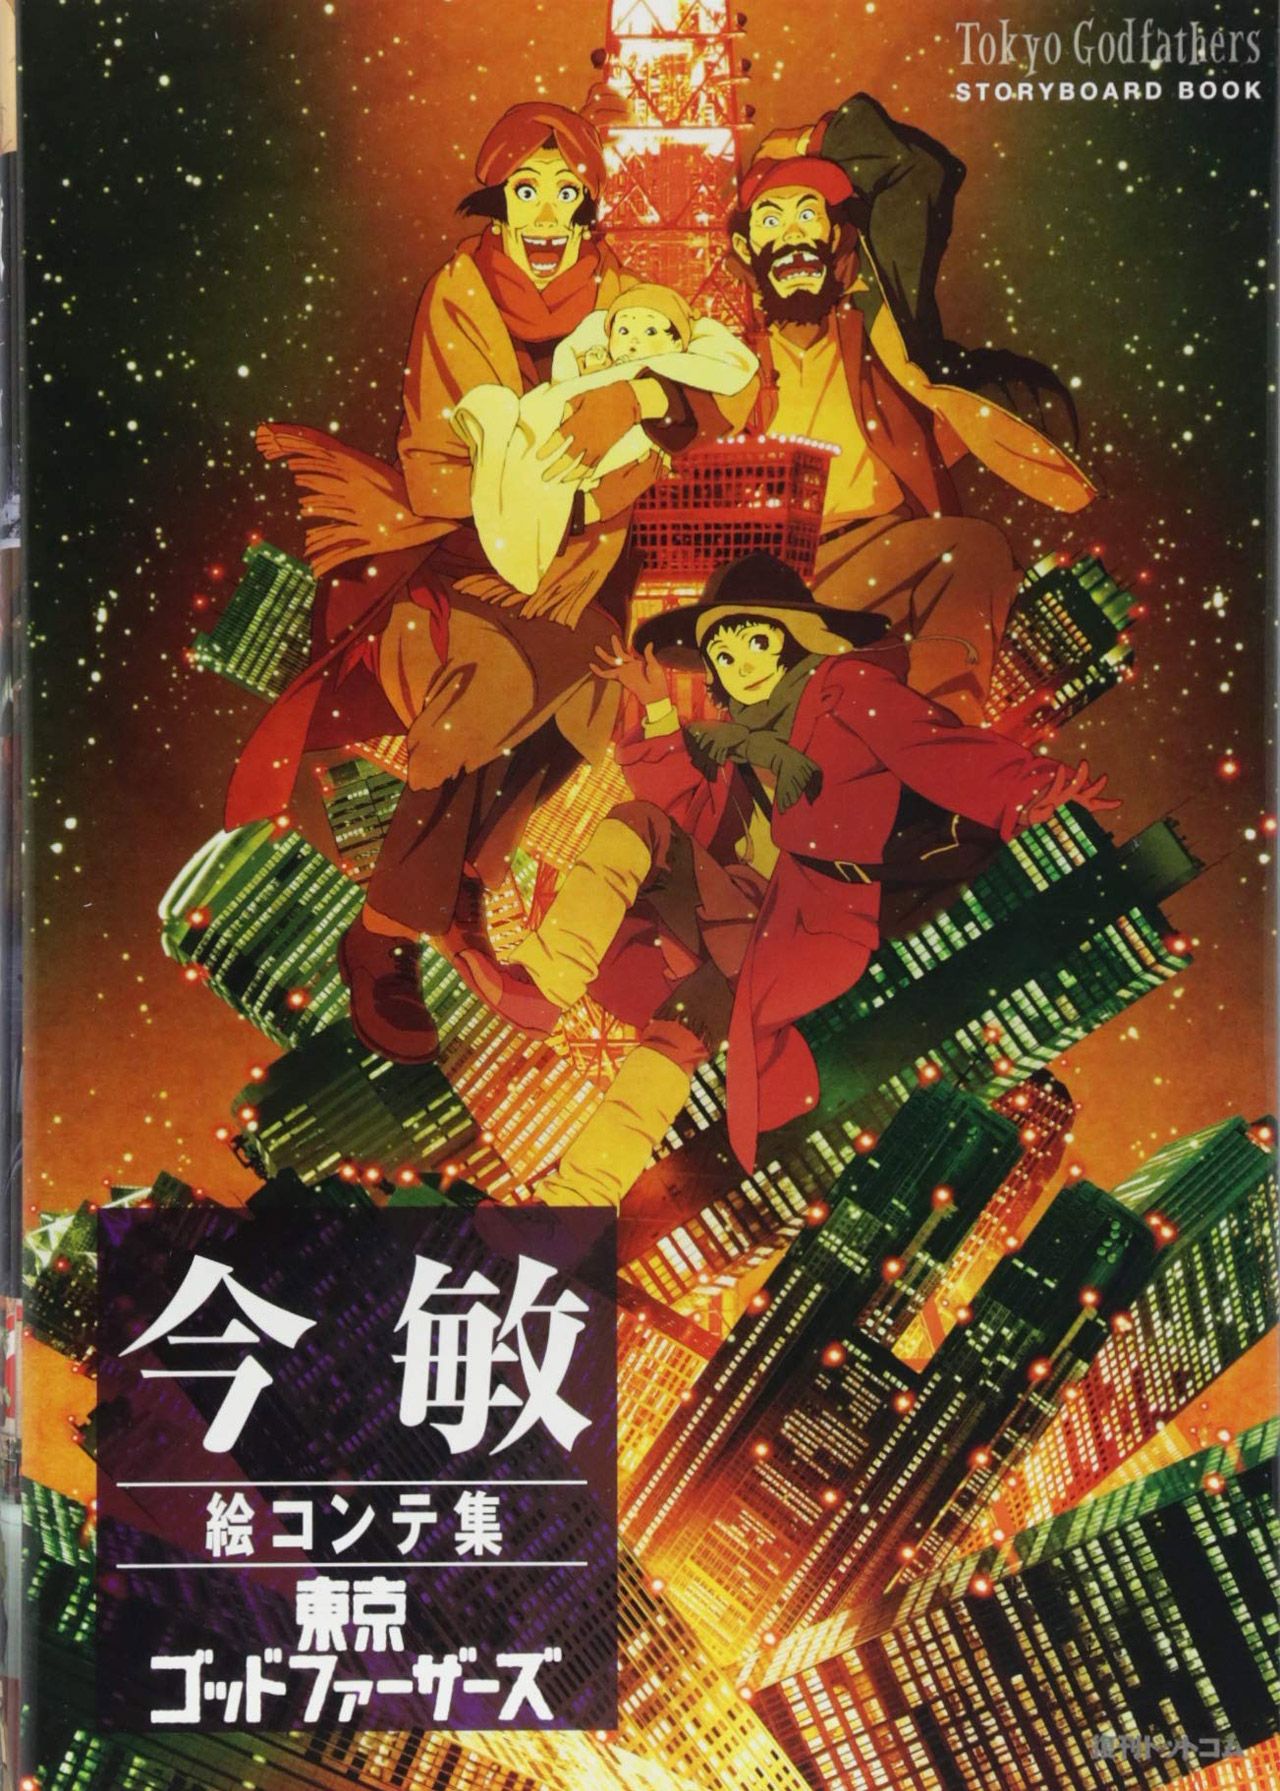 Tokyo Godfathers (2003) Poster #2